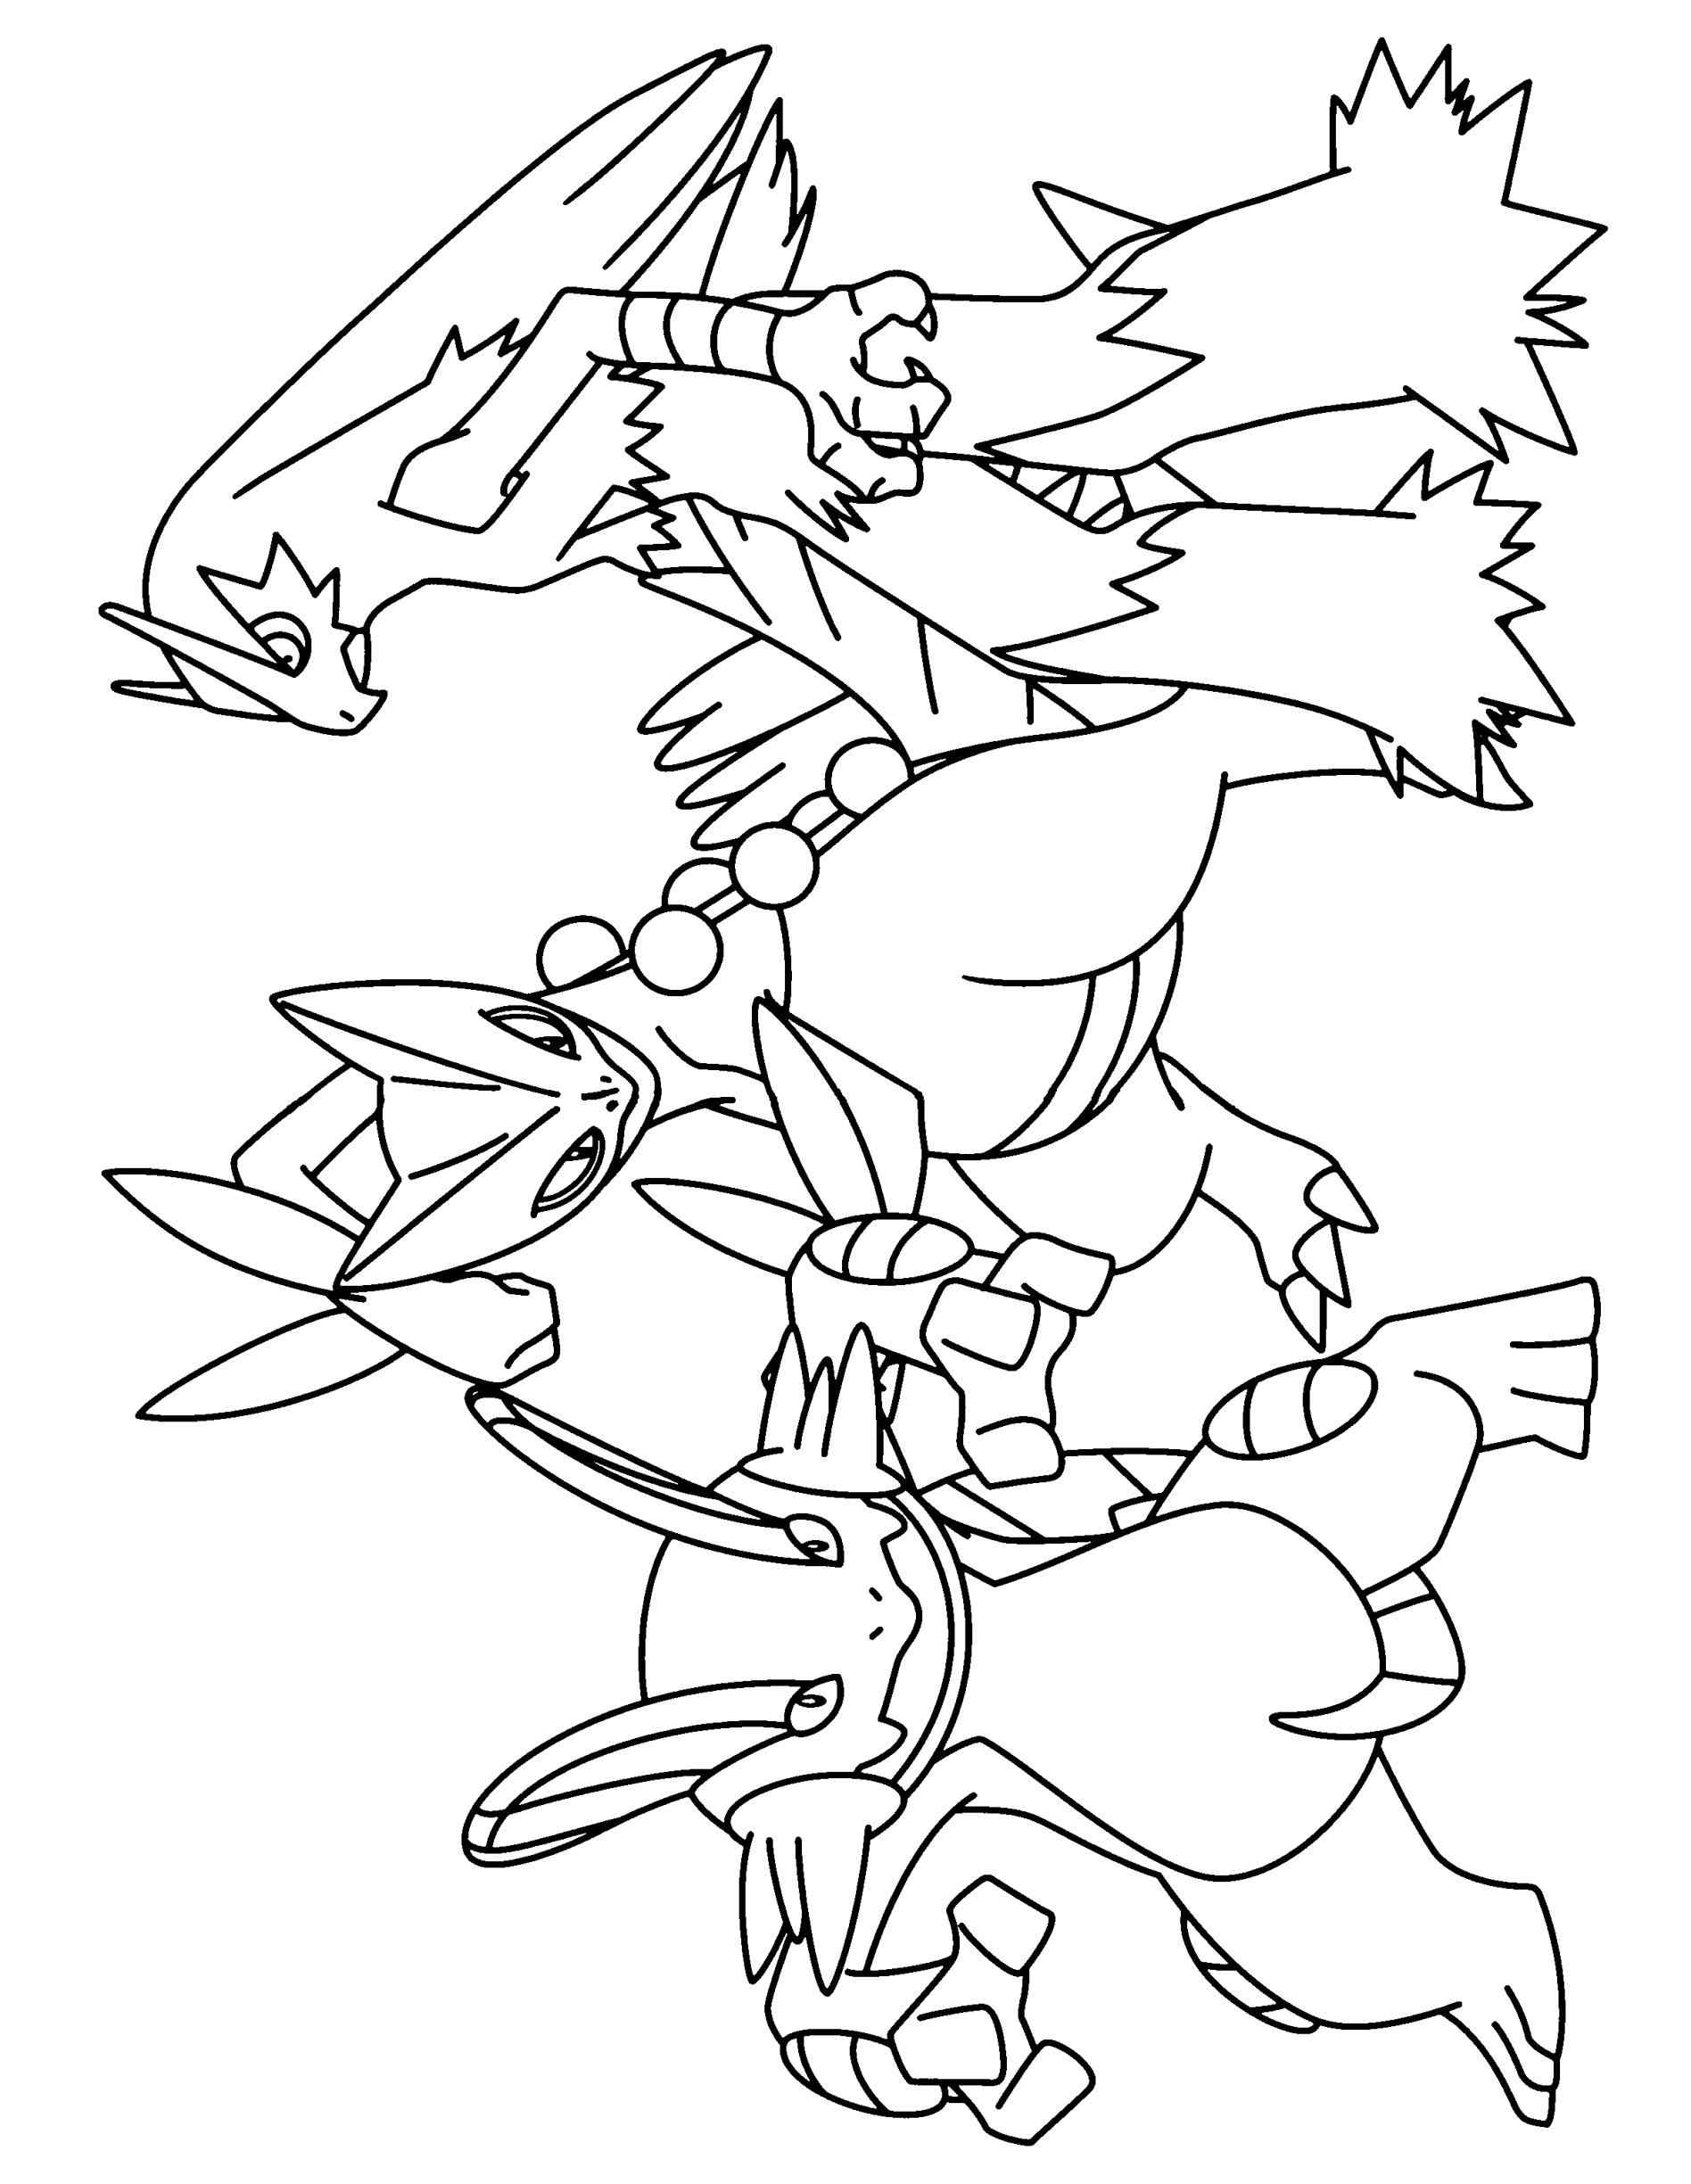 Grovyle Coloring Pages at GetColorings.com | Free printable colorings